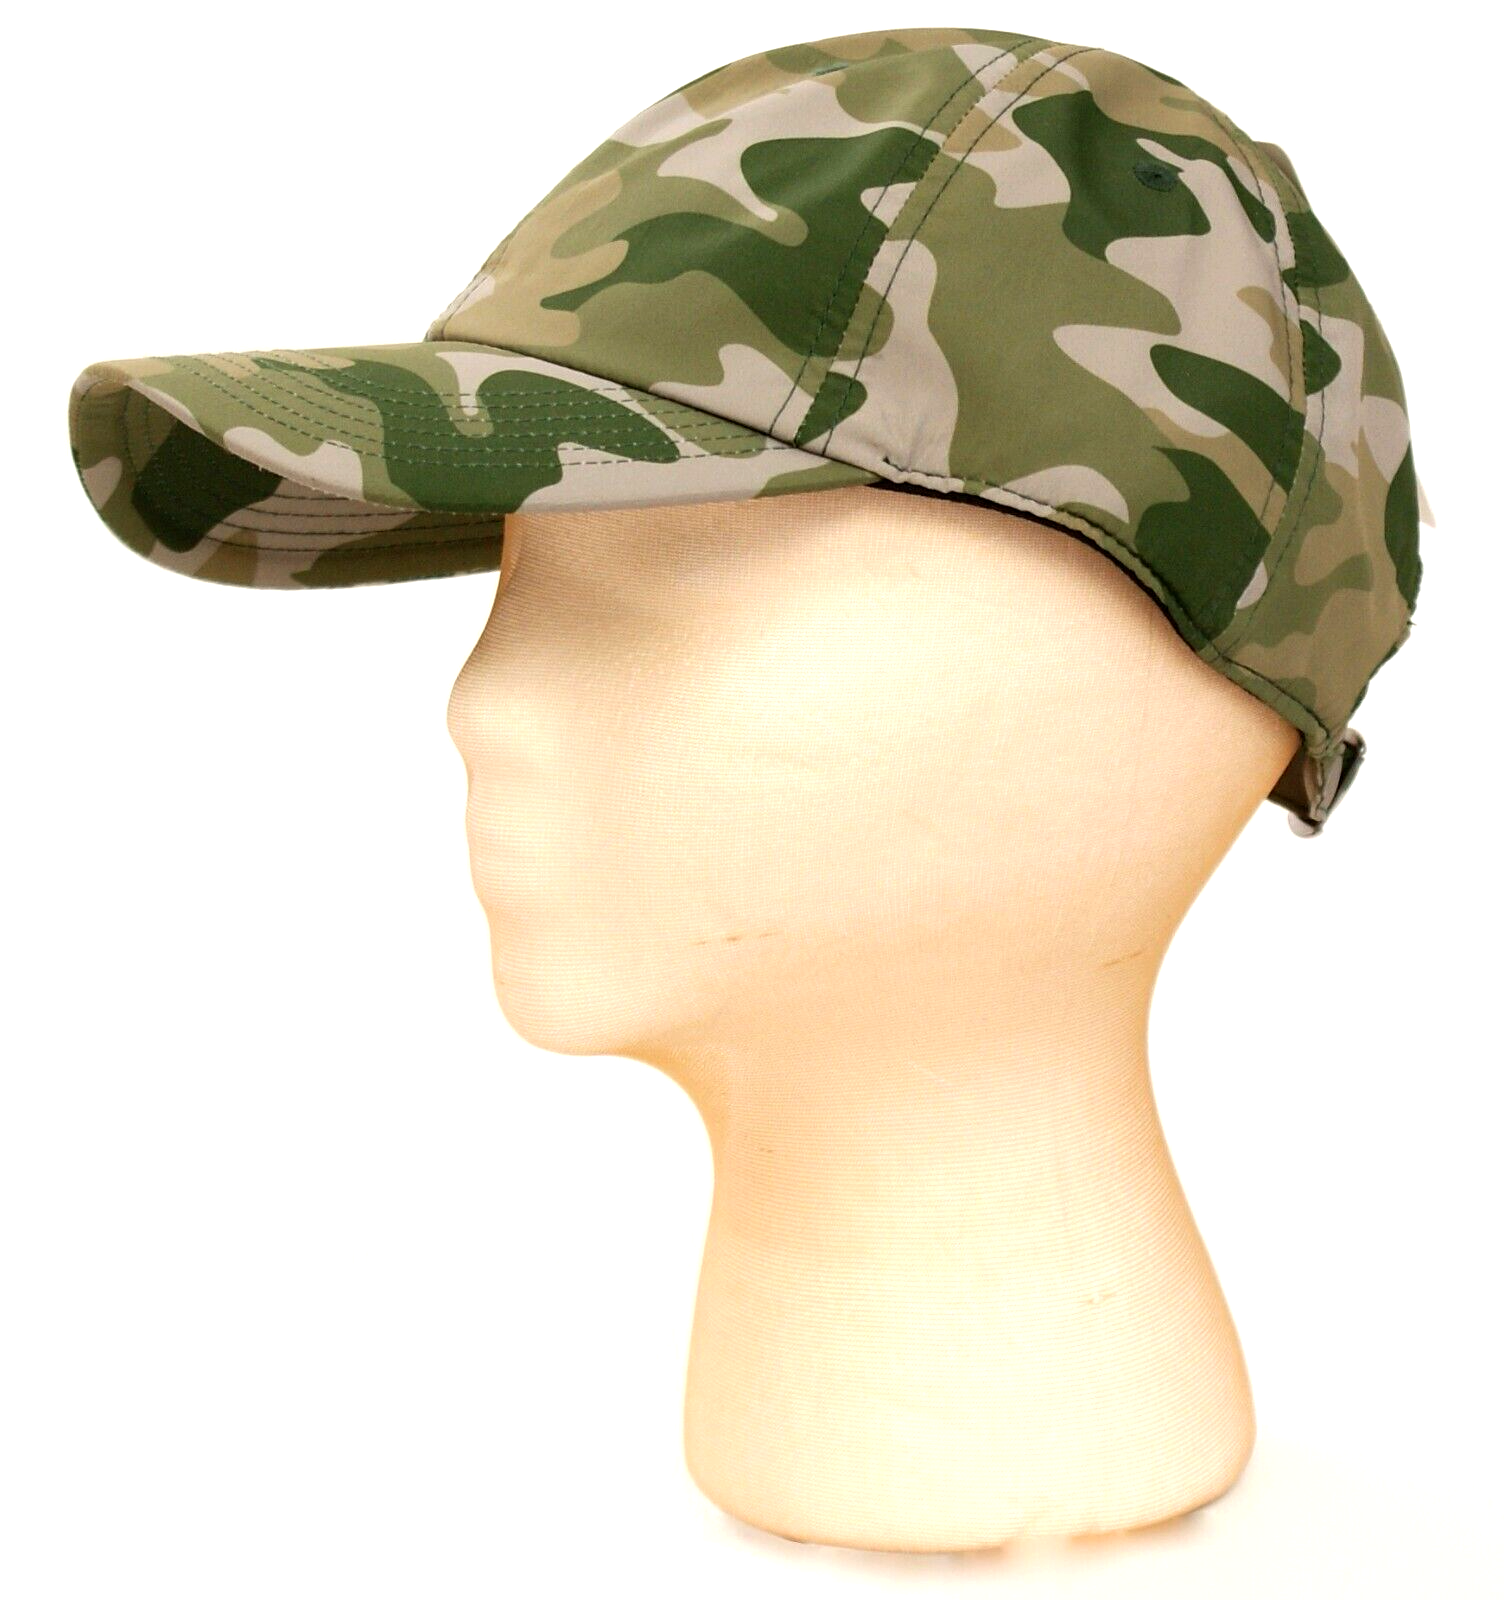 Primary image for Gaiam Green Camo Cassic Fittness Strapback Adjustable Cap Hat Women's One Size